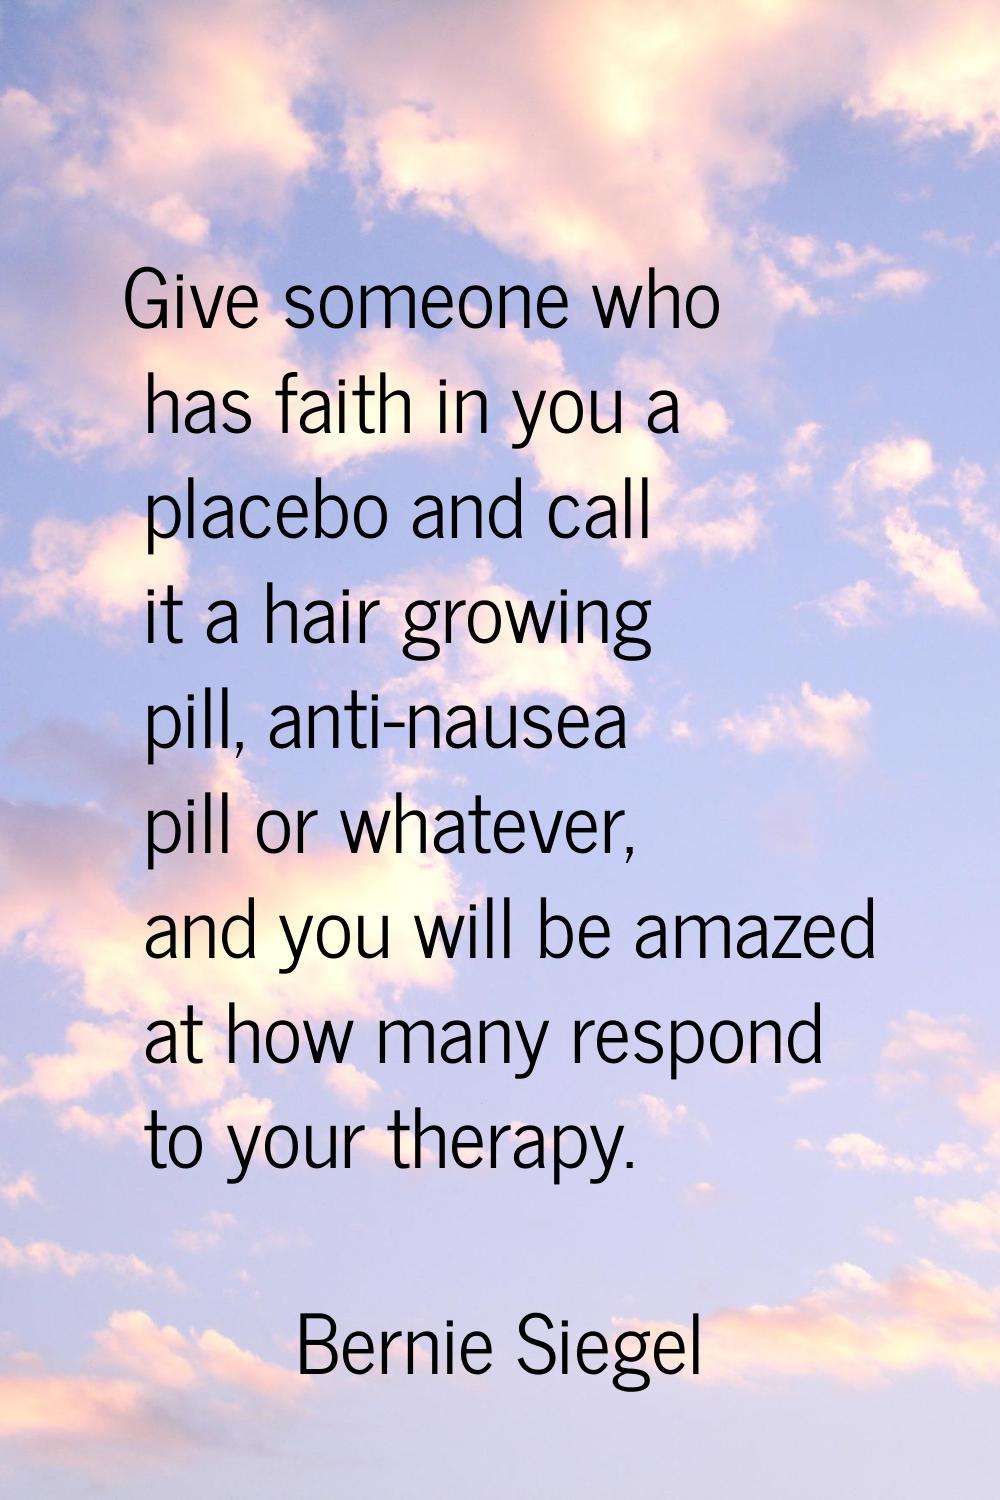 Give someone who has faith in you a placebo and call it a hair growing pill, anti-nausea pill or wh